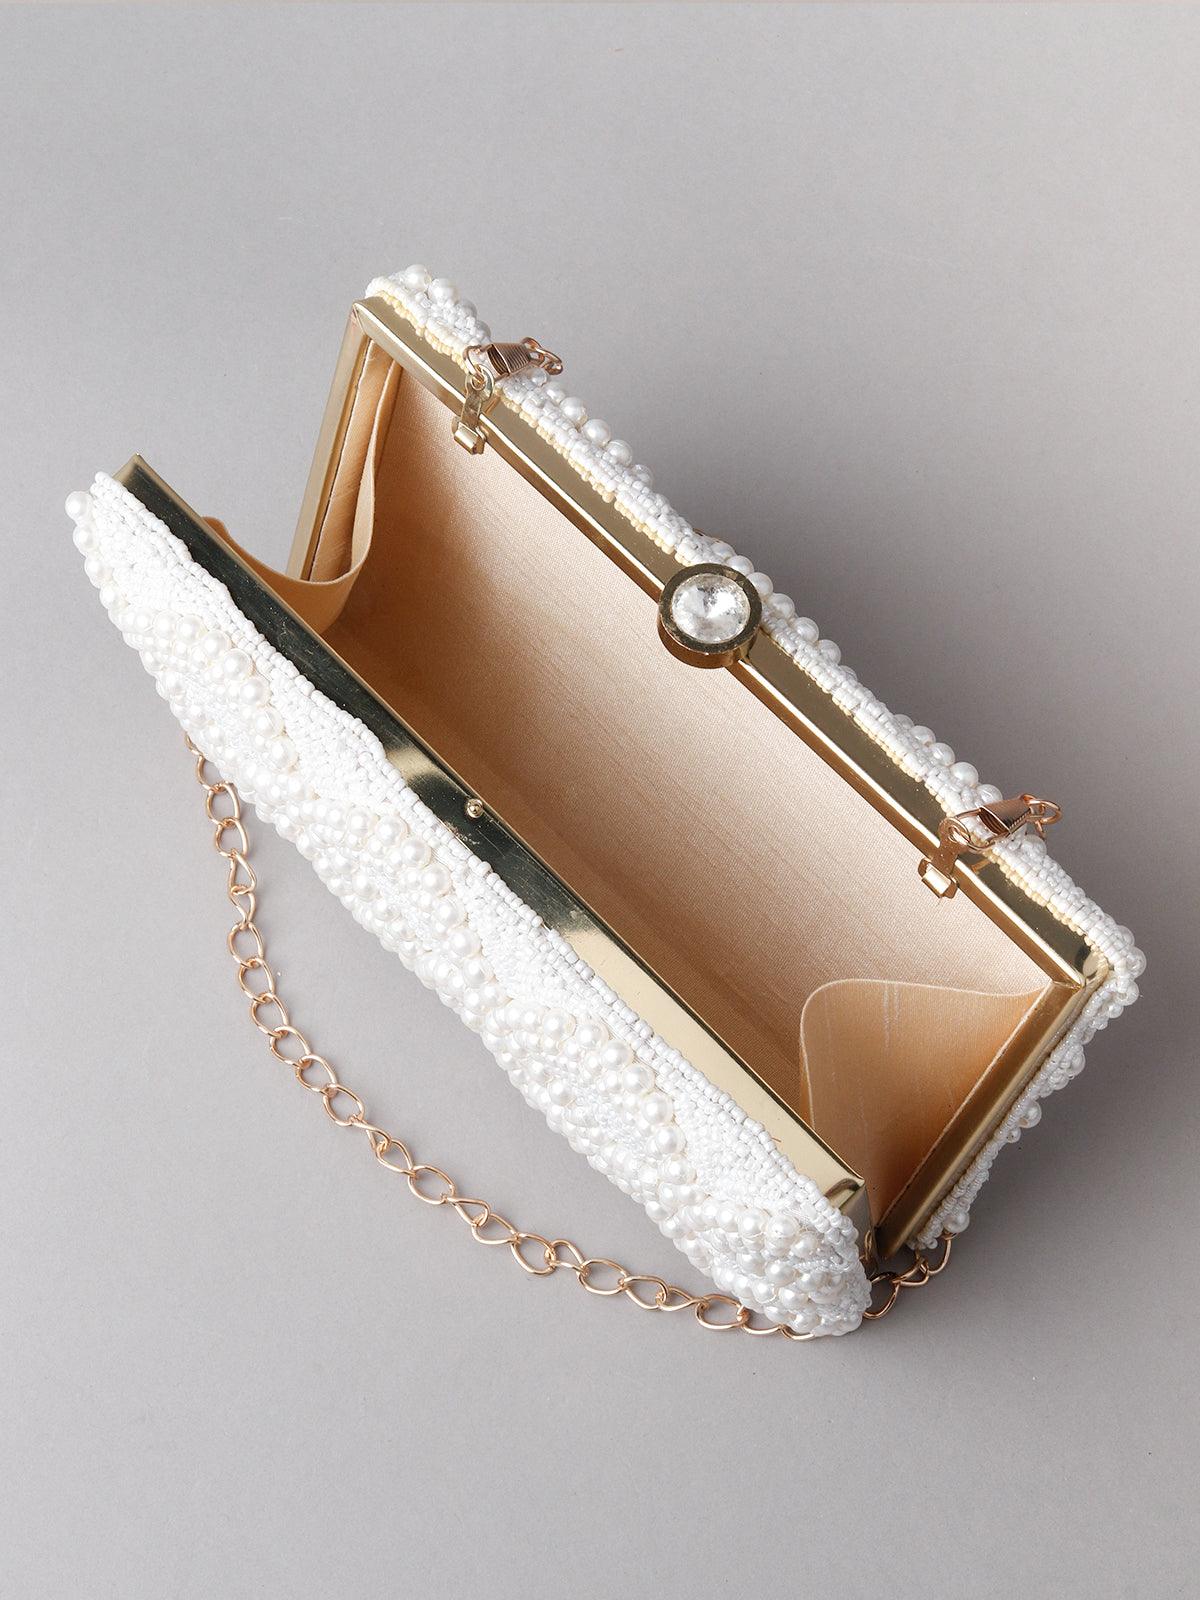 Enticing Rectangular White Pearly Clutch! - Odette